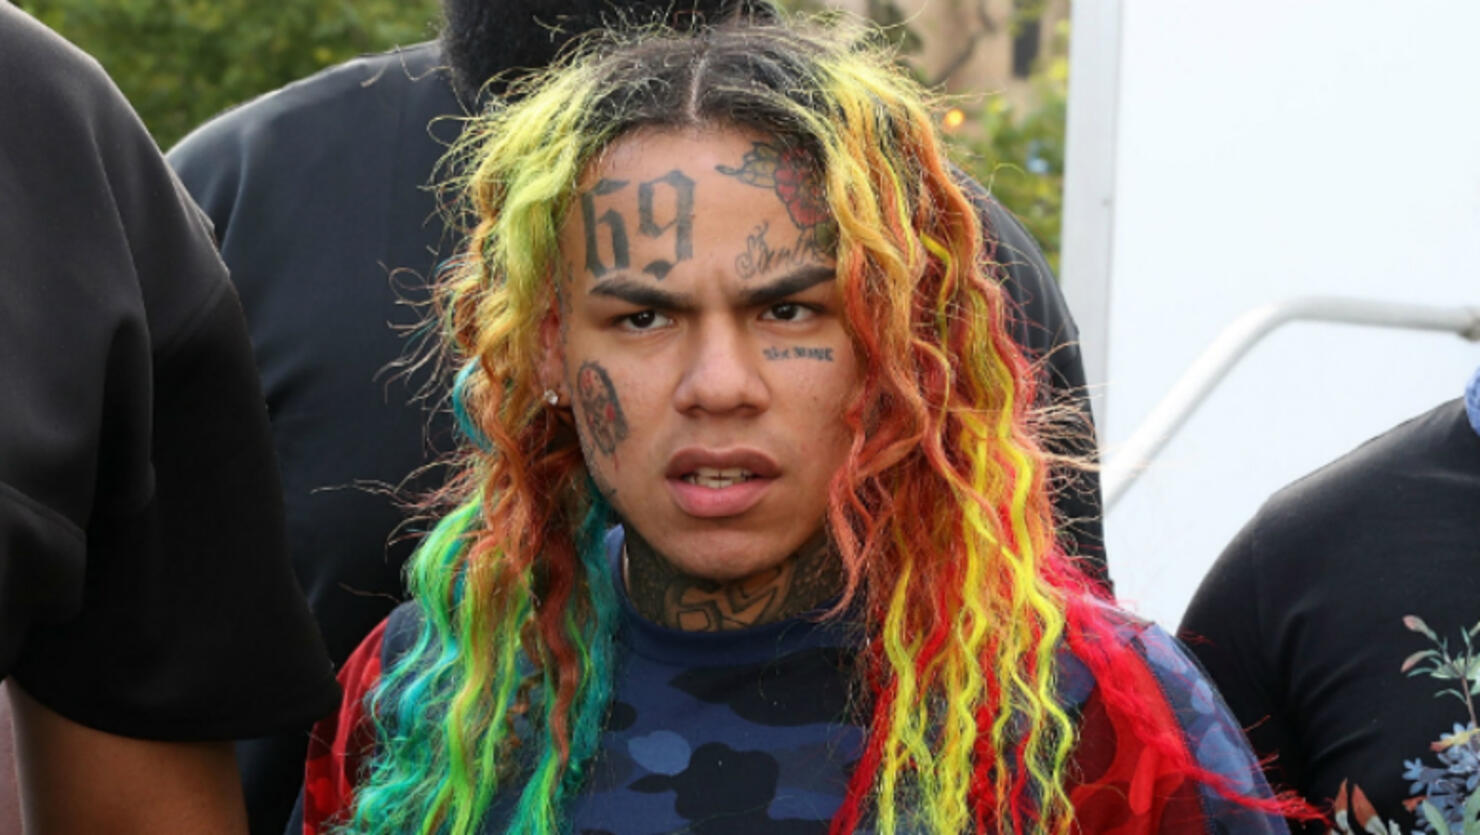 6ix9ine's Not Going Into Witness Protection, He's Got BIG PostPrison